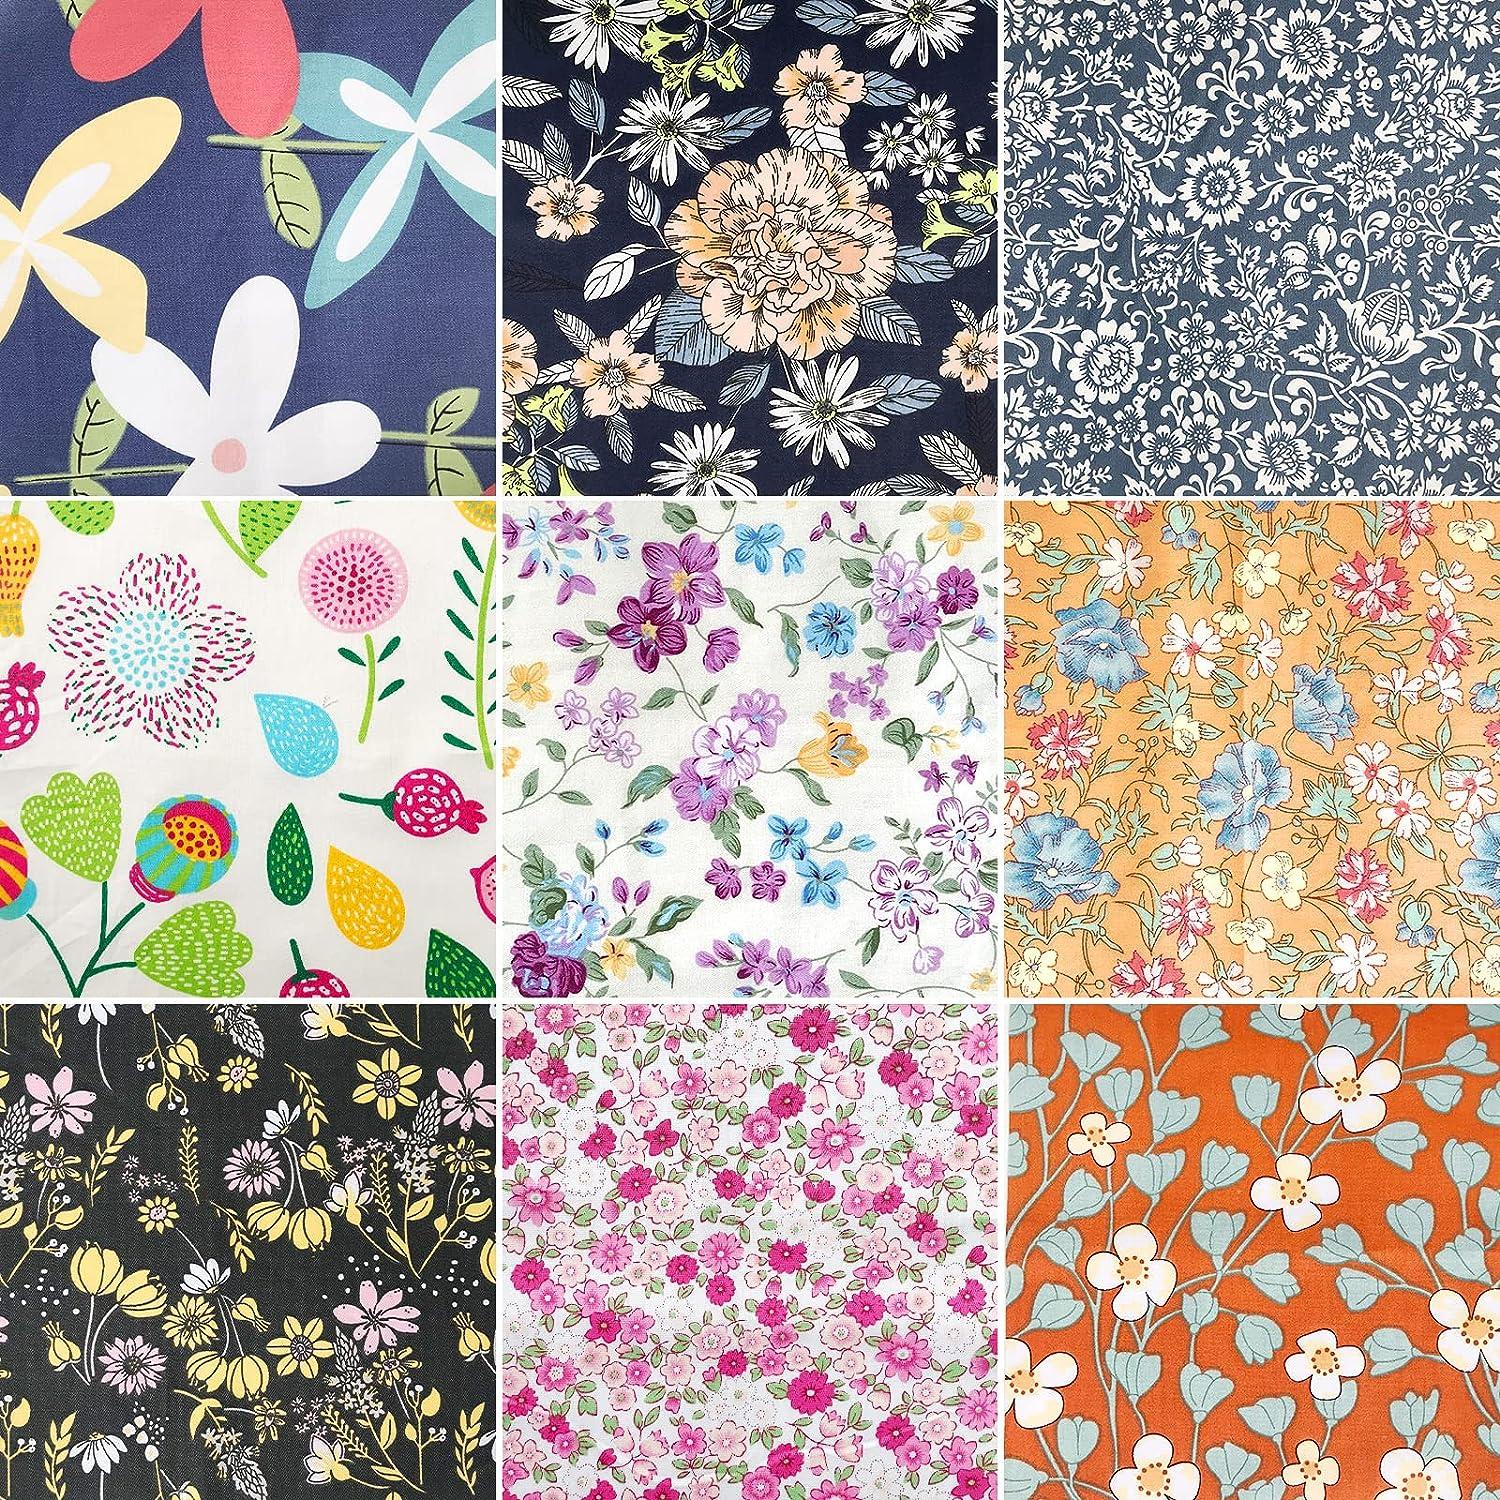 Quilting Fabric, Misscrafts Cotton Craft Fabric Bundle Squares Patchwork  Pre-Cut Quilt Squares for DIY Sewing Scrapbooking Quilting Dot Pattern  (50PCS